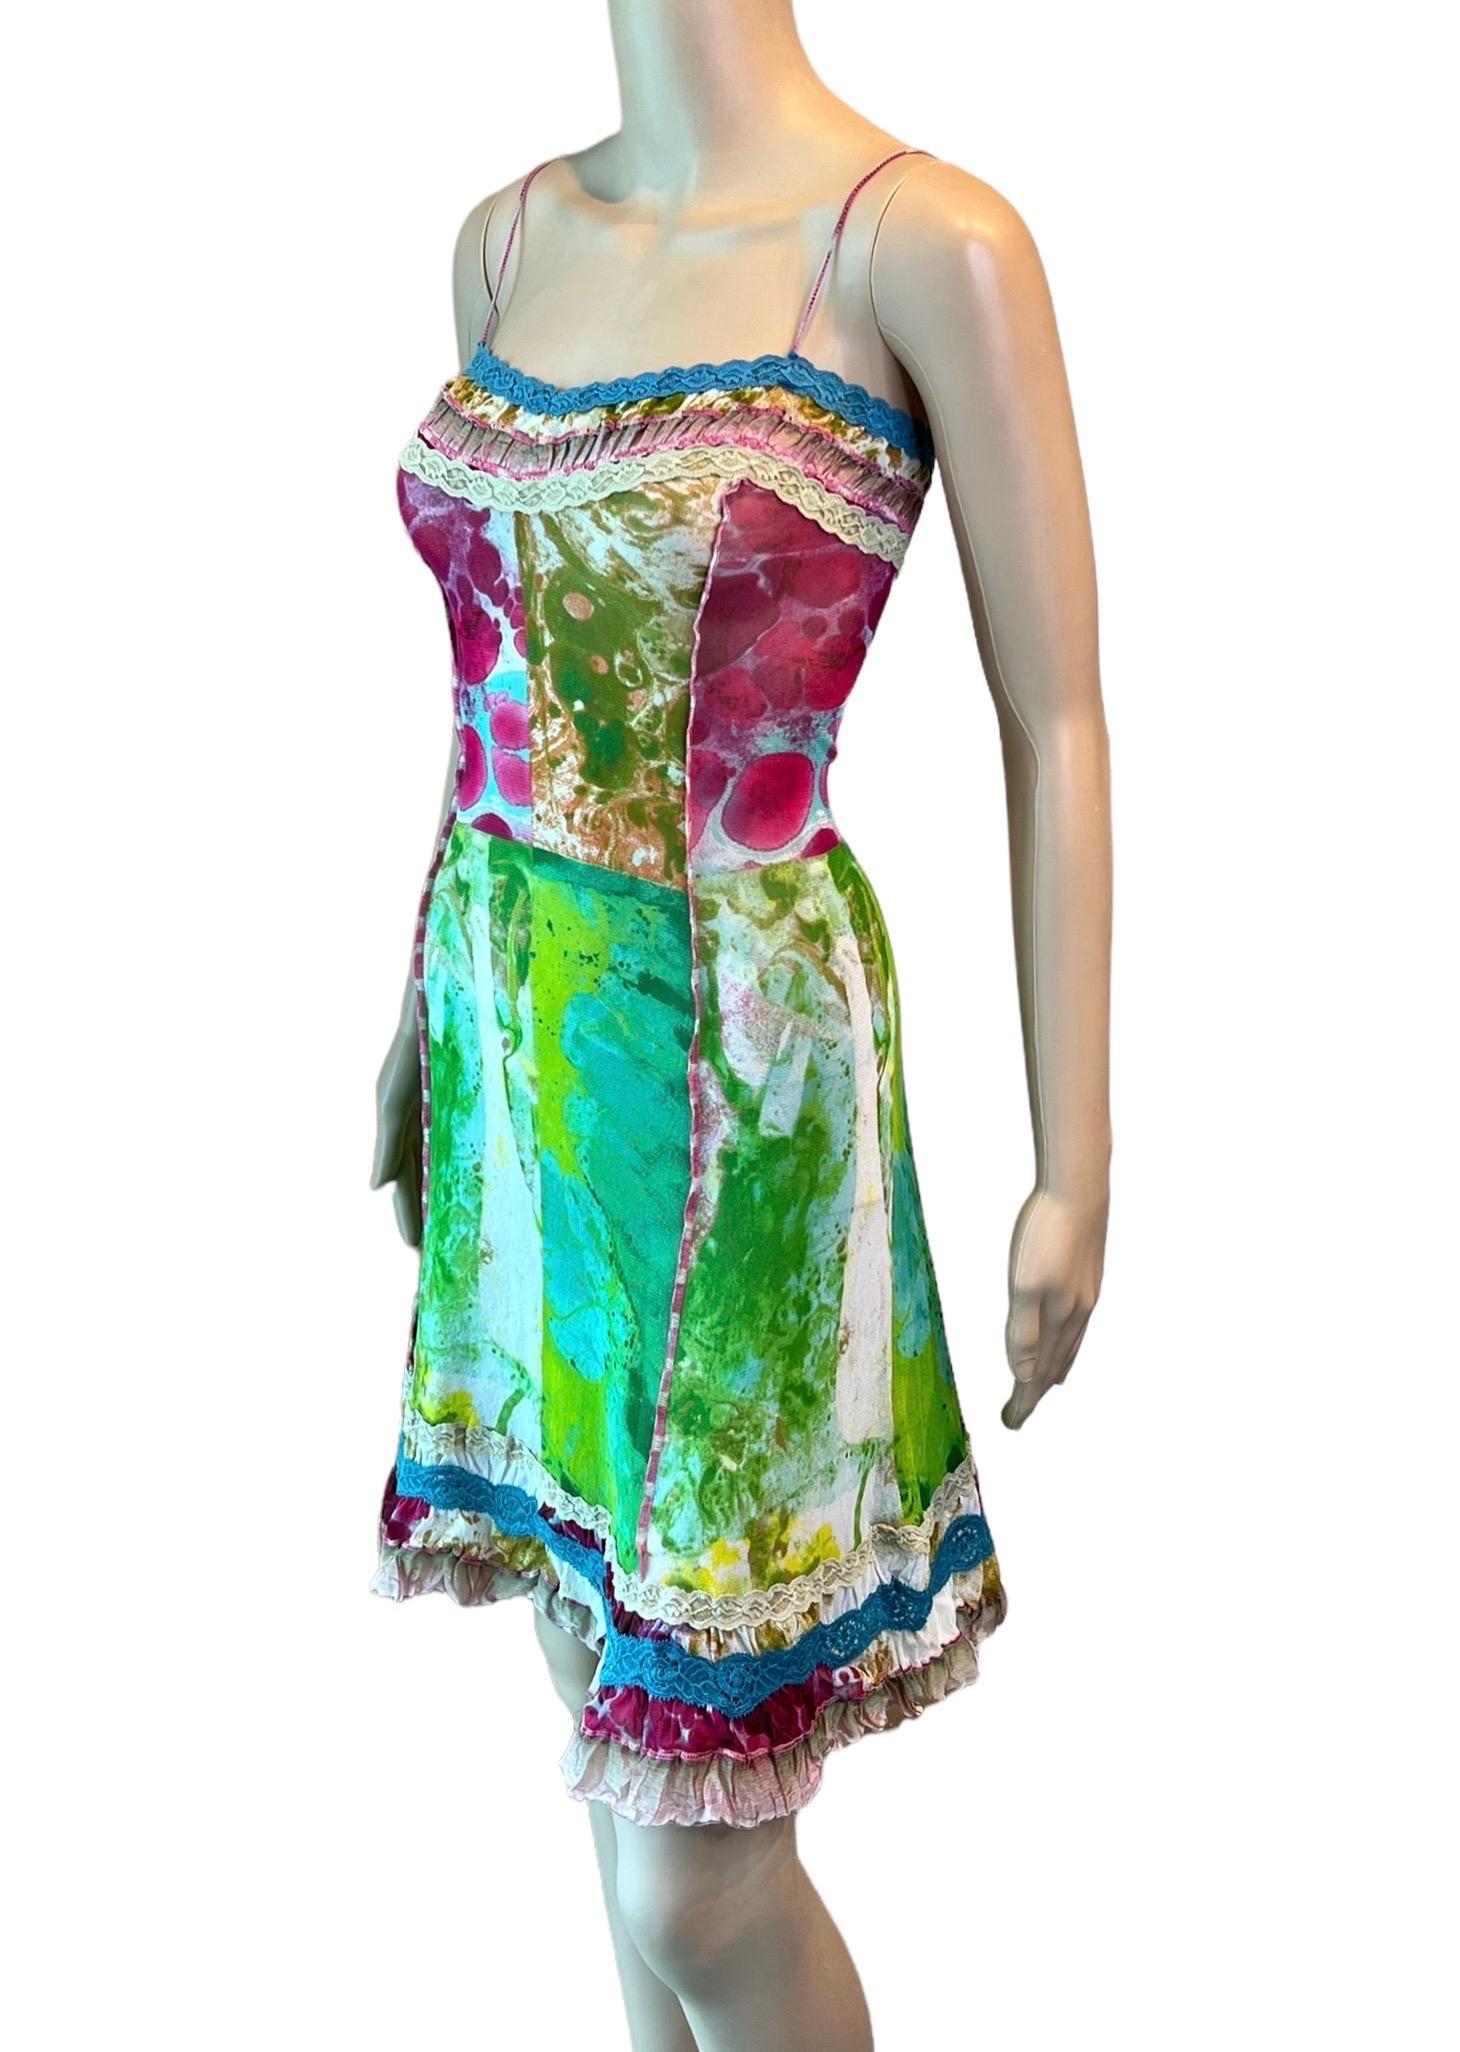 Jean Paul Gaultier S/S 2000 Psychedelic Bacteria Print Sheer Mesh Mini Dress  In Good Condition For Sale In Naples, FL